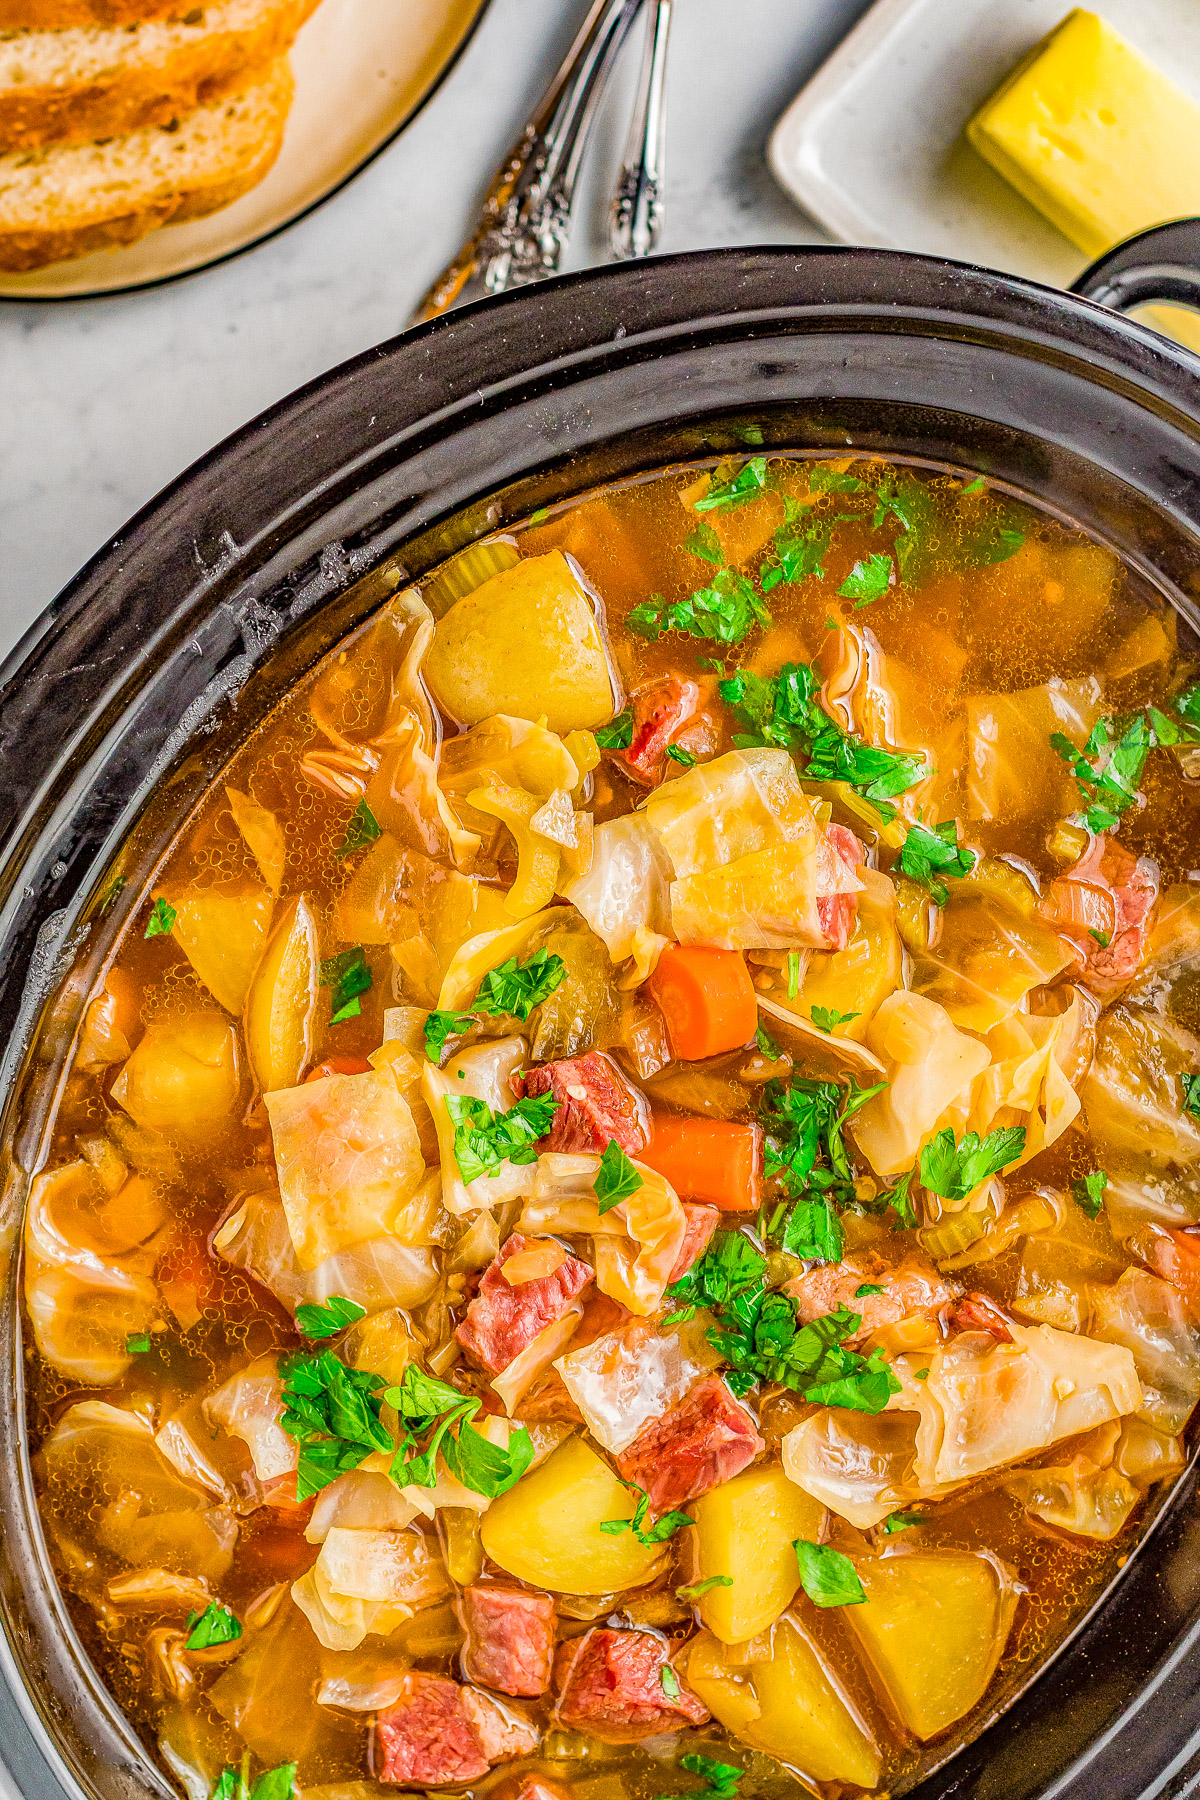 Slow Cooker Corned Beef and Cabbage Soup - Hearty comfort food complete with savory corned beef, potatoes, carrots, celery, and more! It's the EASIEST soup you'll ever make and will become a family FAVORITE especially when the weather is chilly! Stovetop cooking instructions also provided.